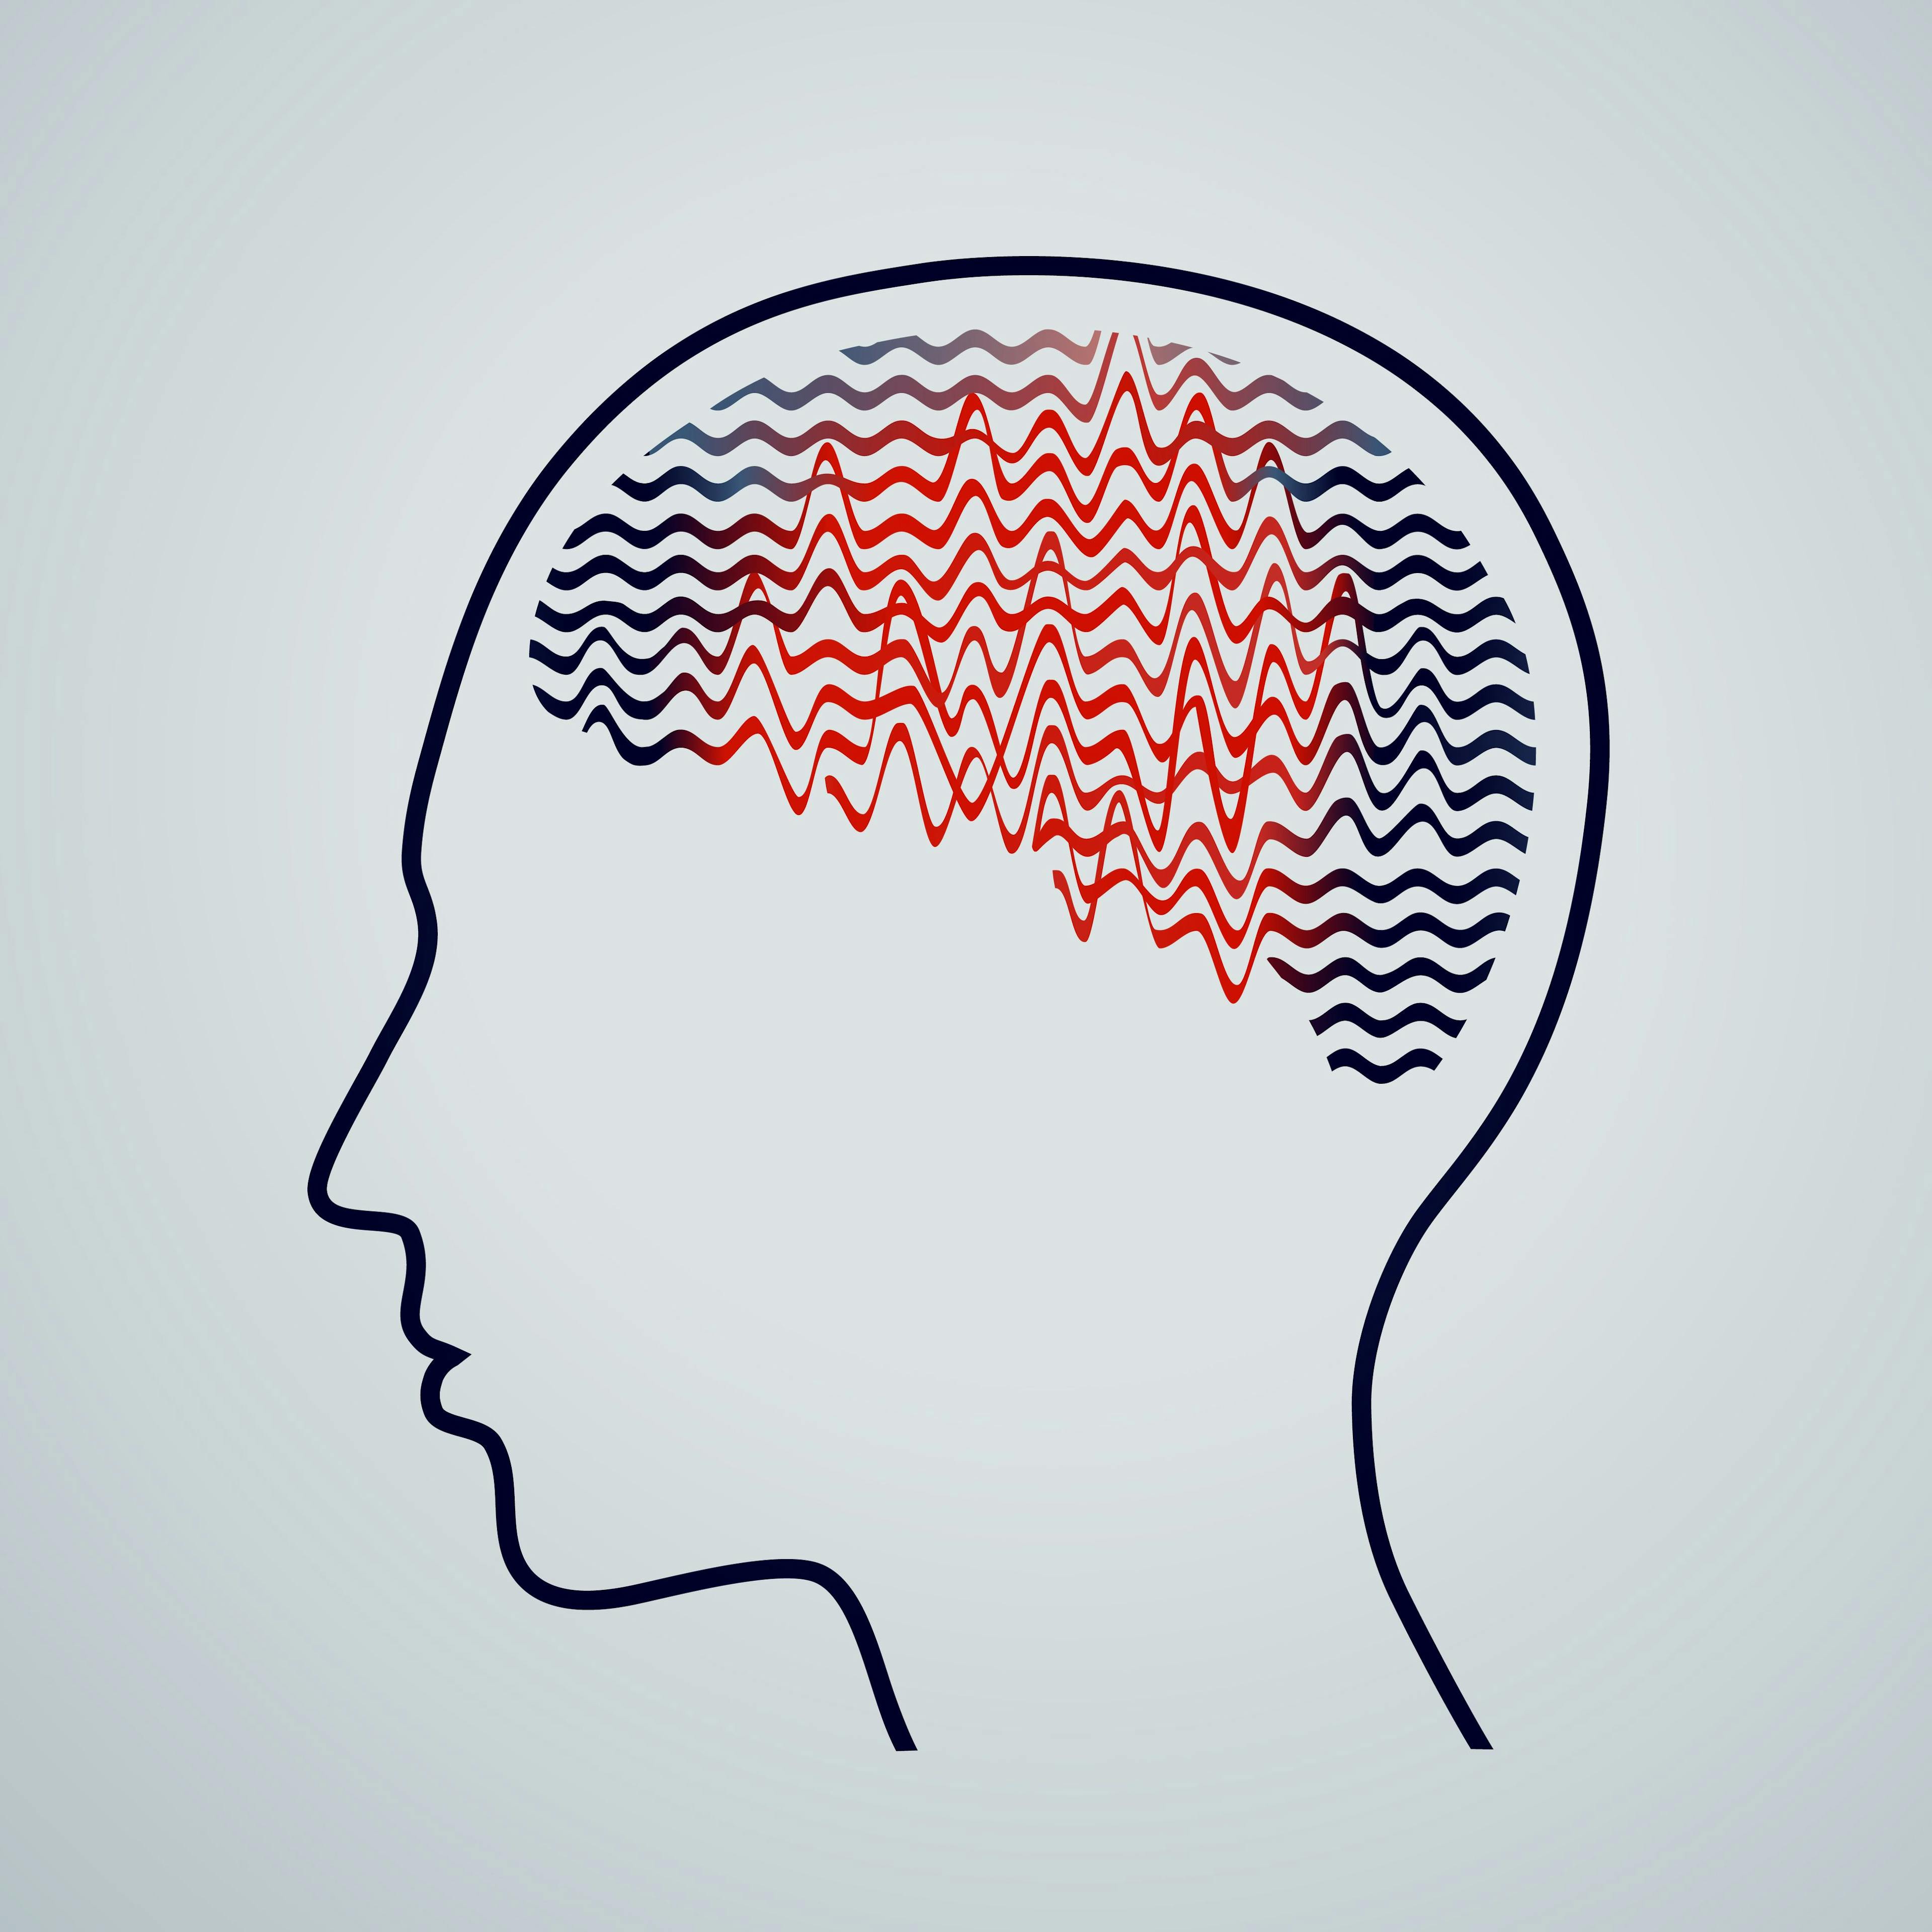 Expert: 80% of Patients With Functional Seizures Are Initially Misdiagnosed With Epilepsy